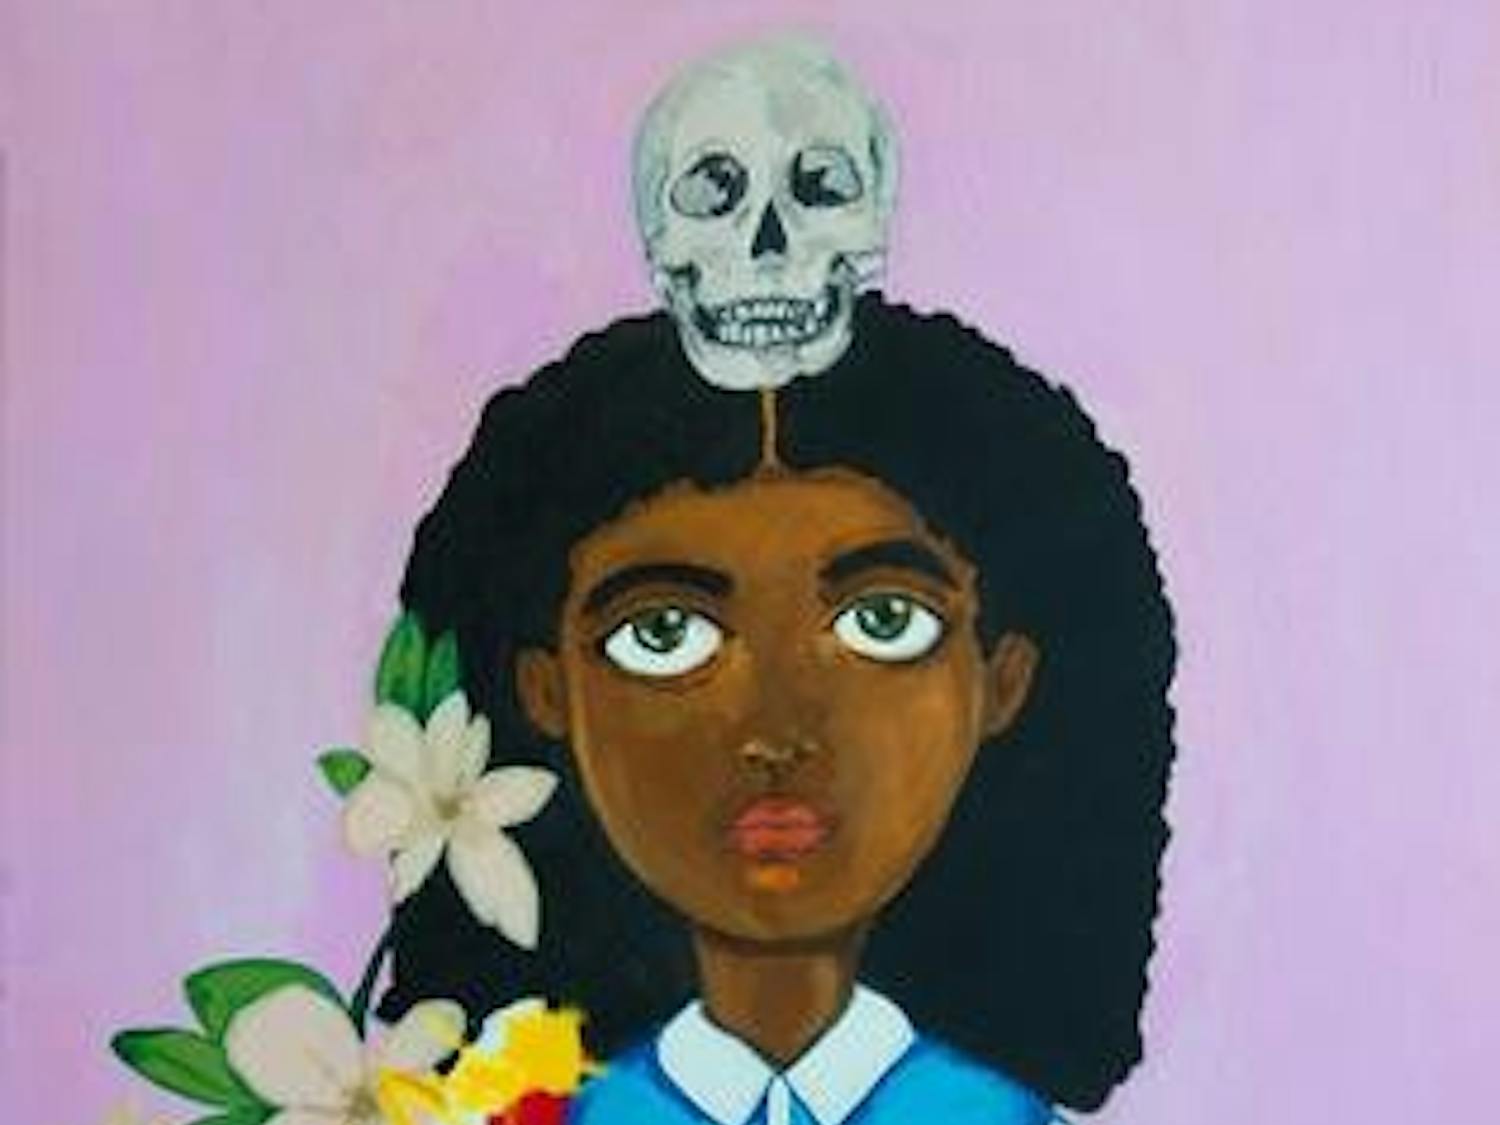 Noname's 2016 acclaimed mixtape Telefone was celebrated for its stripped-down production and profound lyrical content